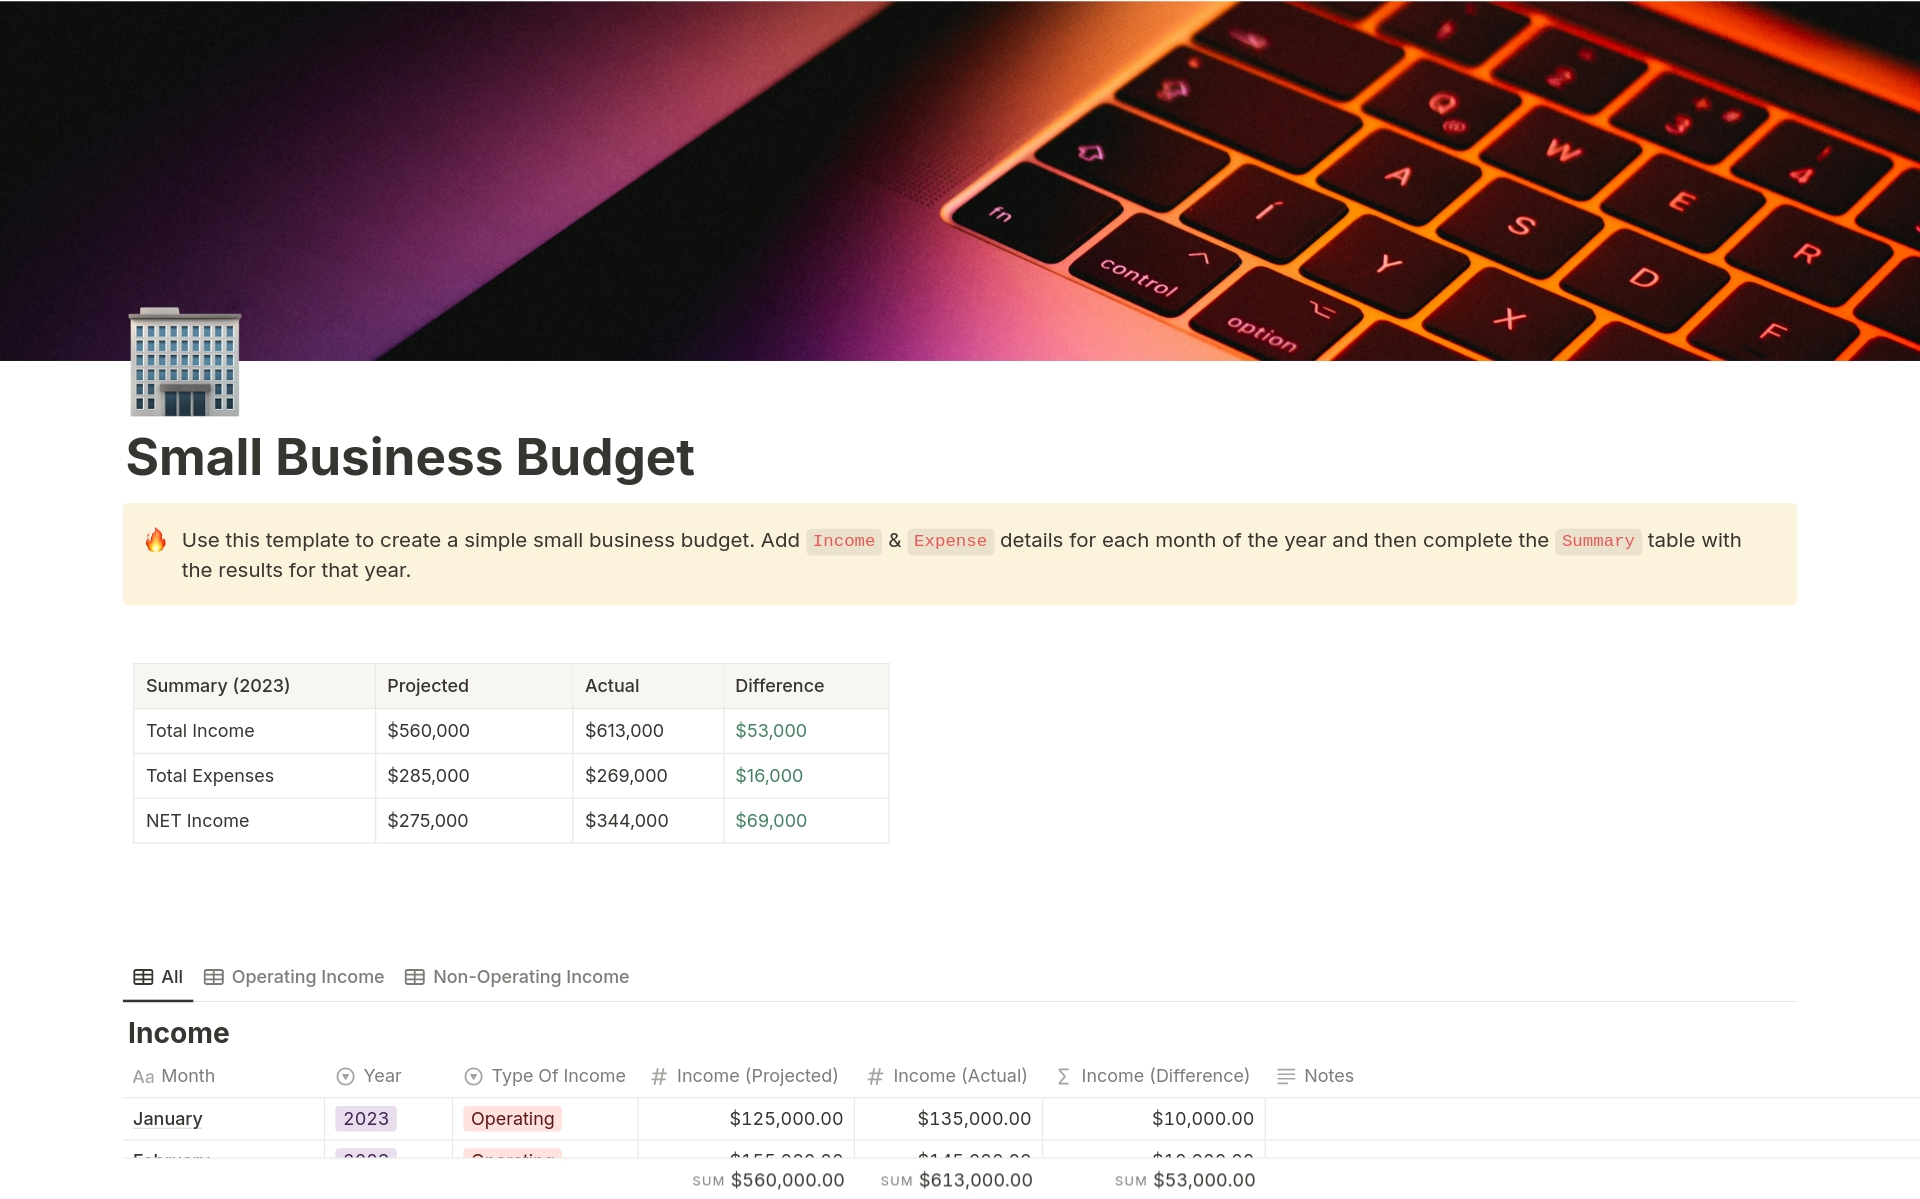 Use this template to create a simple small business budget.